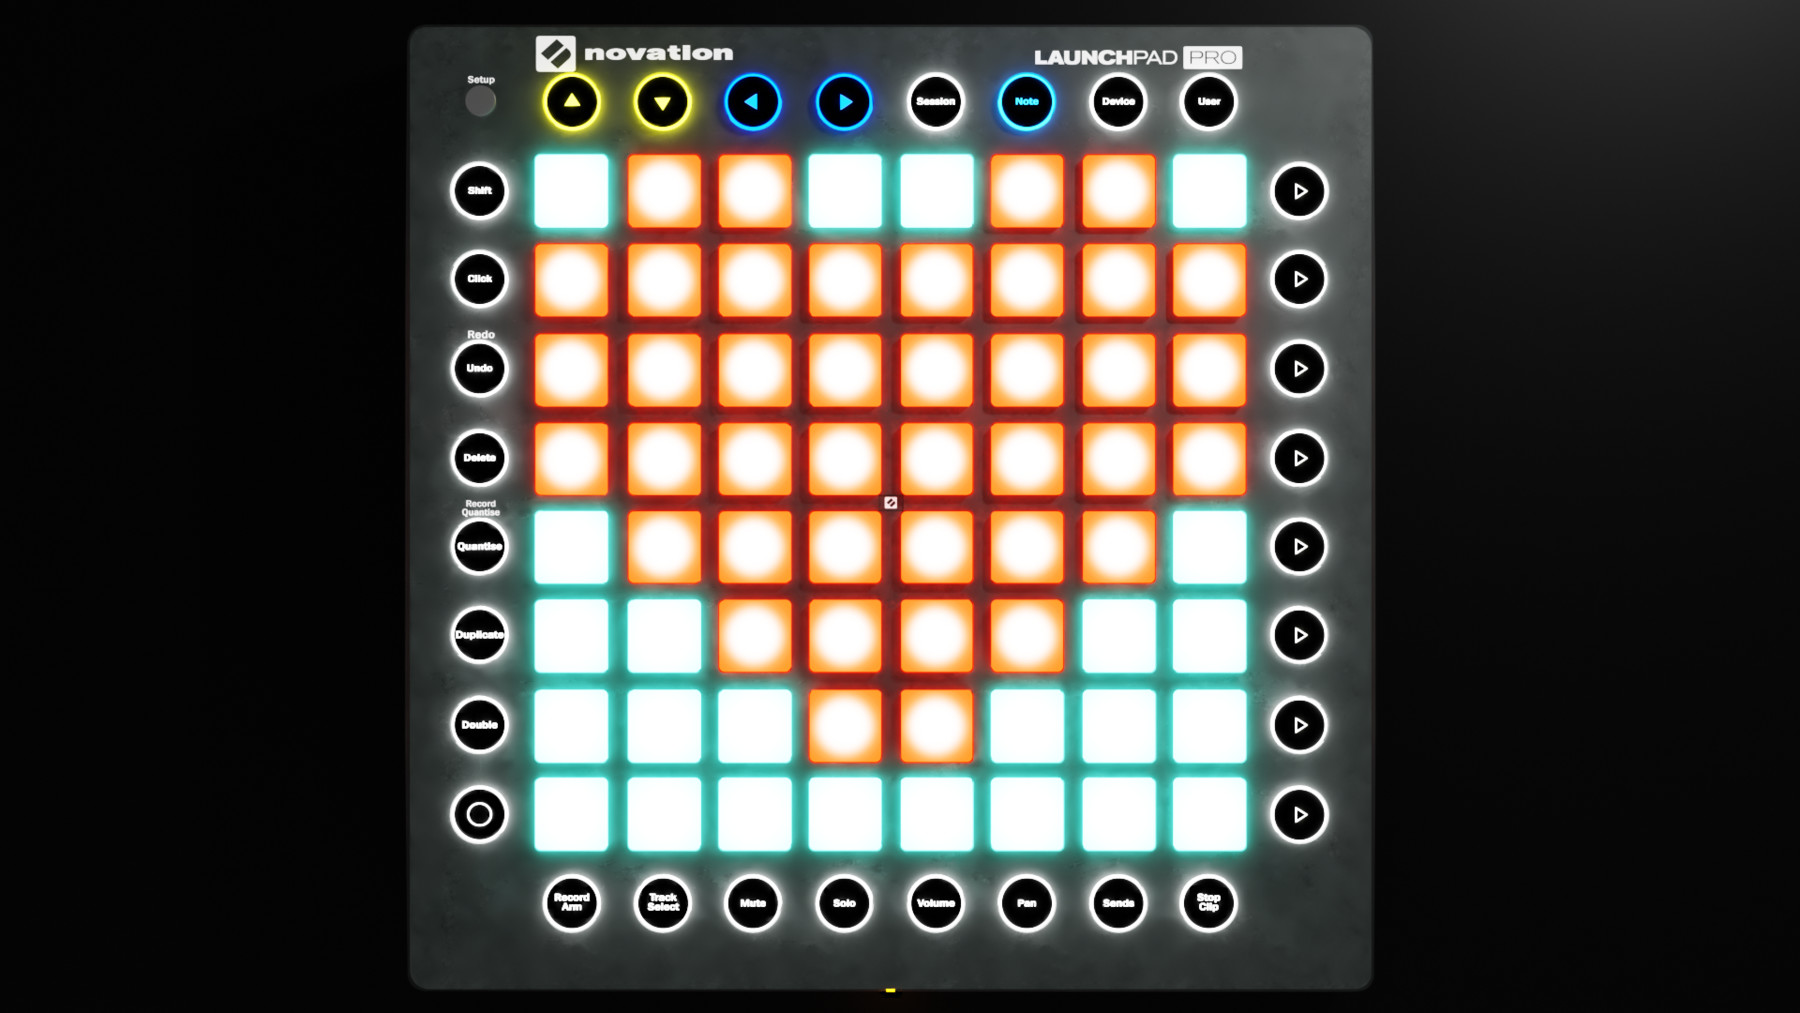 Novation Launchpad Pro 3D Model made in Blender Launchpad is an 8x8 grid RG...